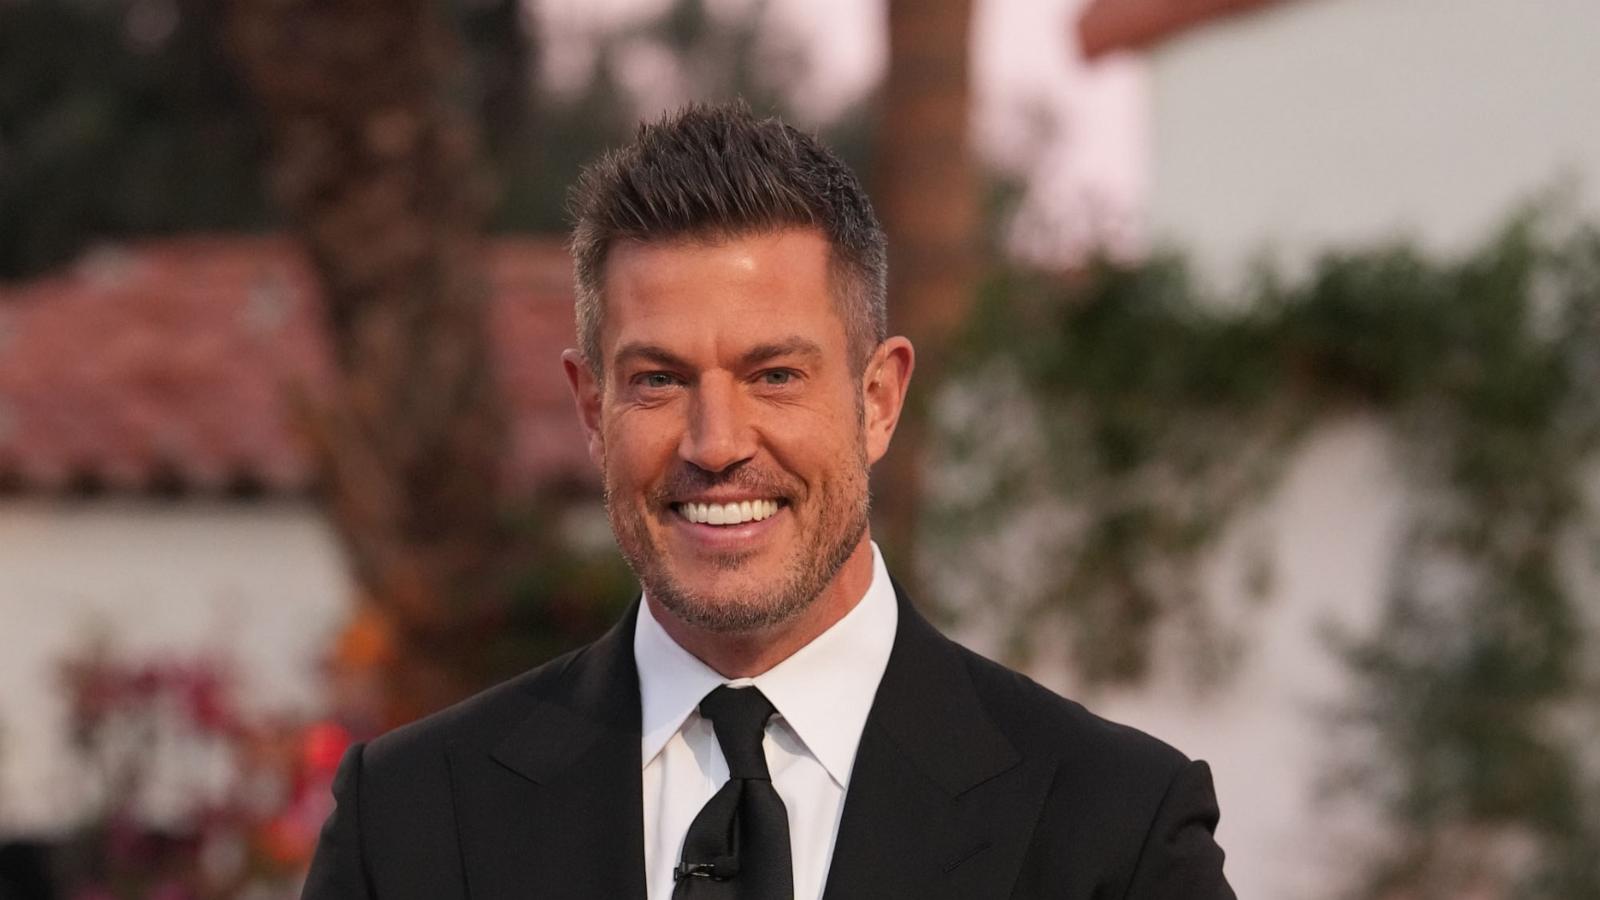 PHOTO: Jesse Palmer, the host of "The Golden Bachelor" on ABC.